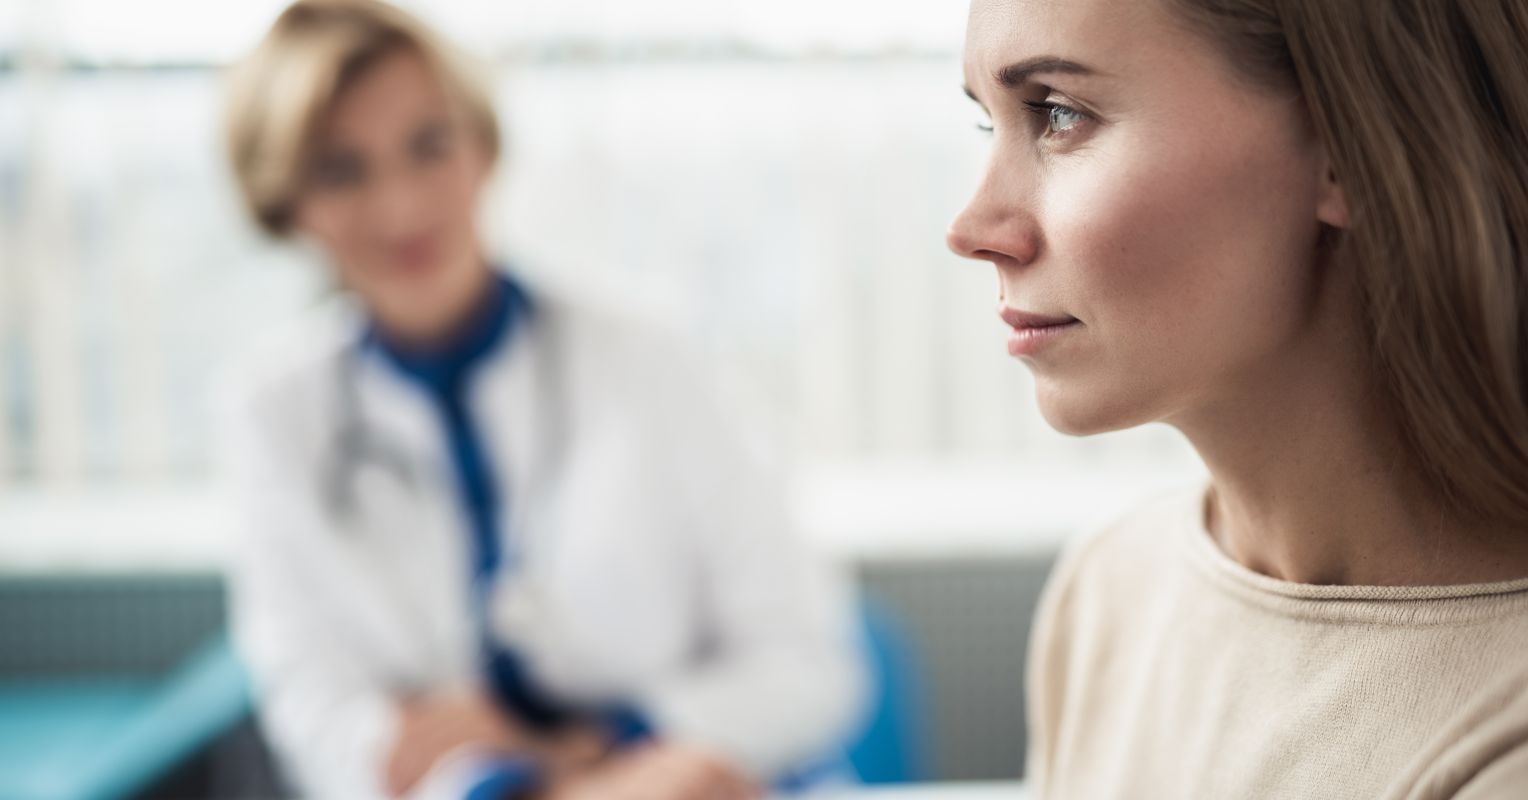 What to do if you're feeling dismissed by your healthcare